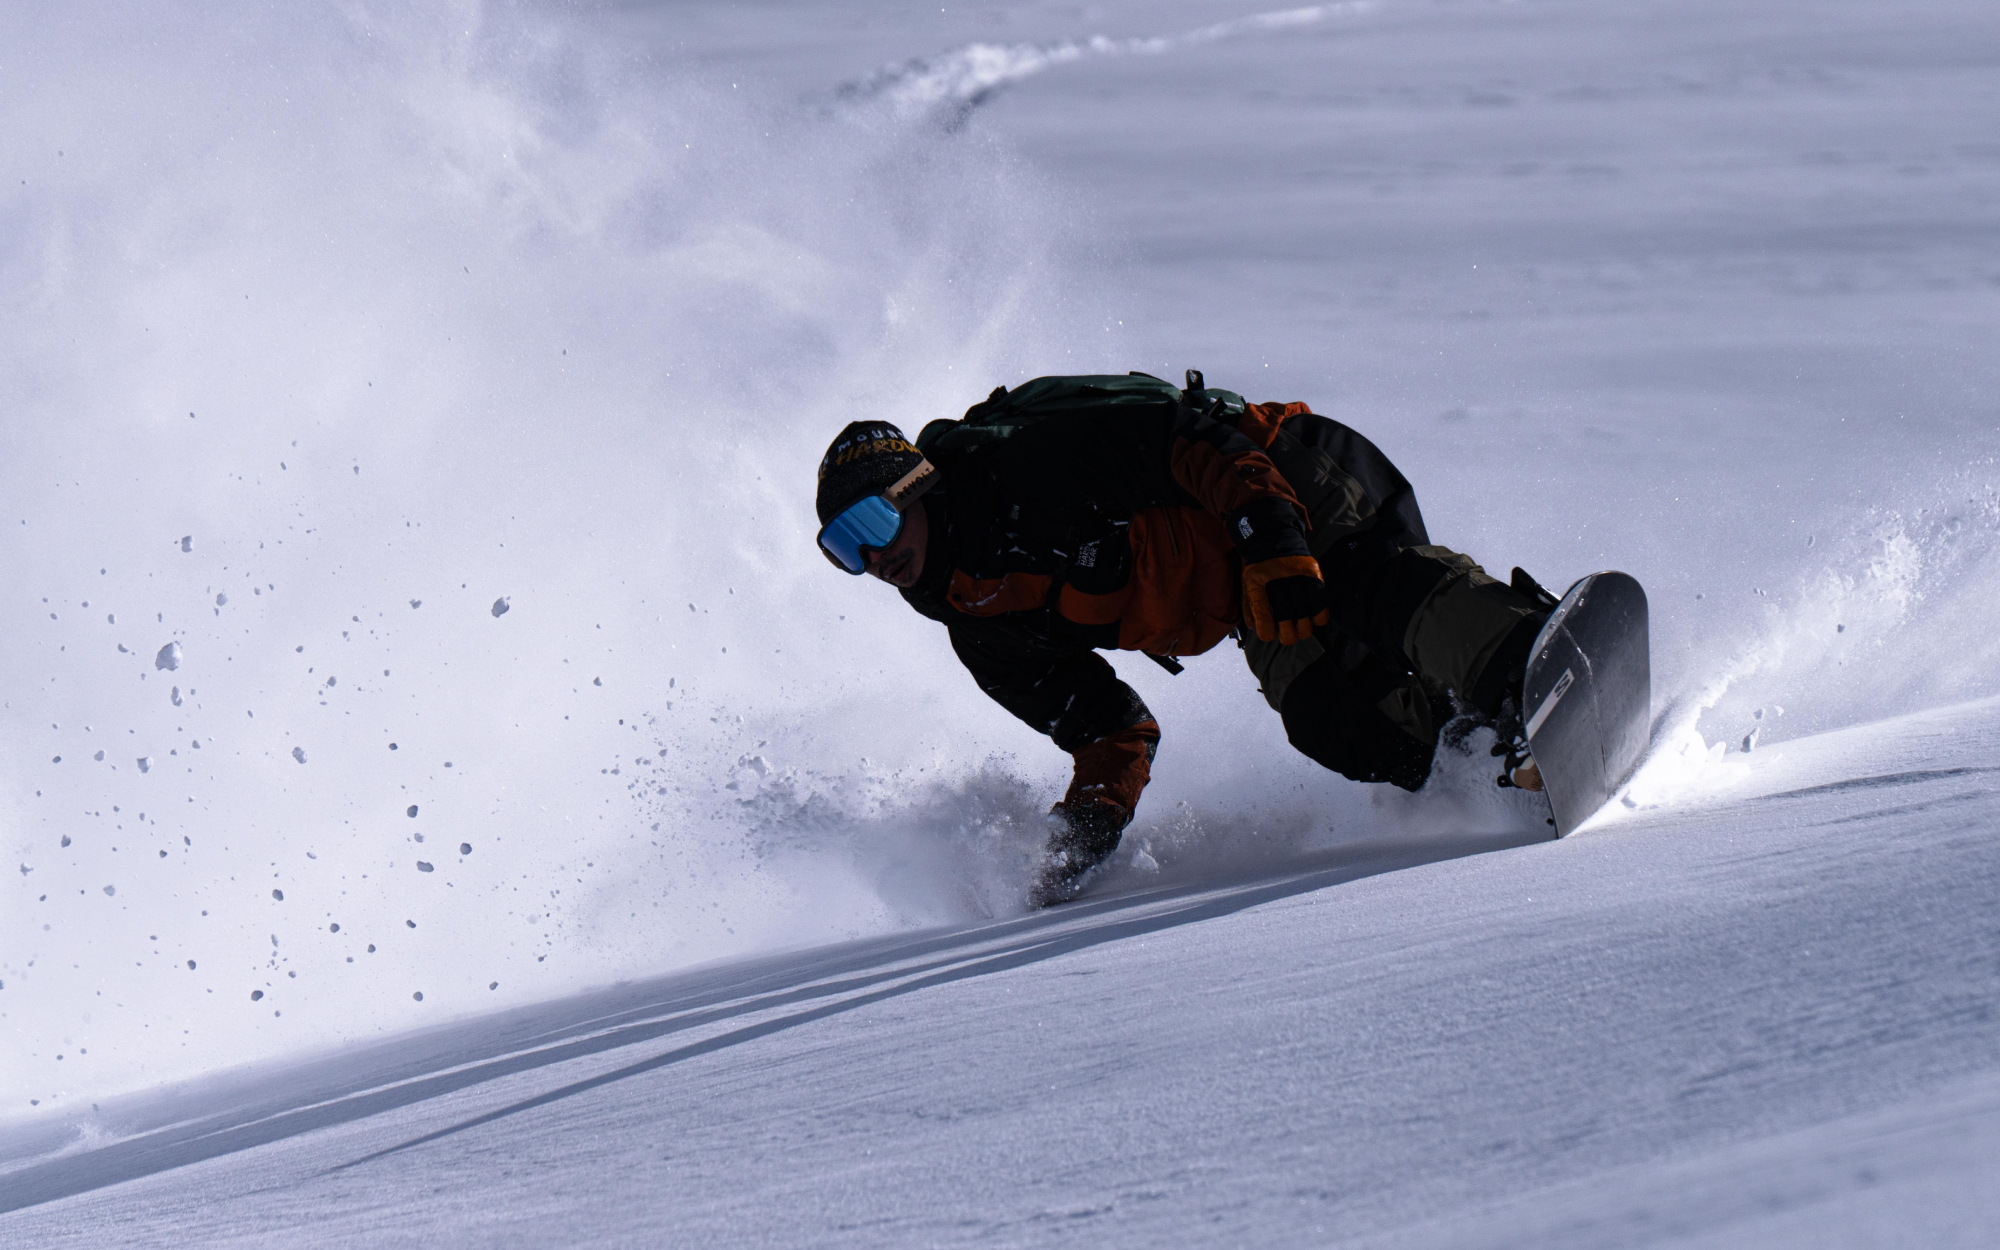 Close-up of Keisuke riding in powder on the mountain.